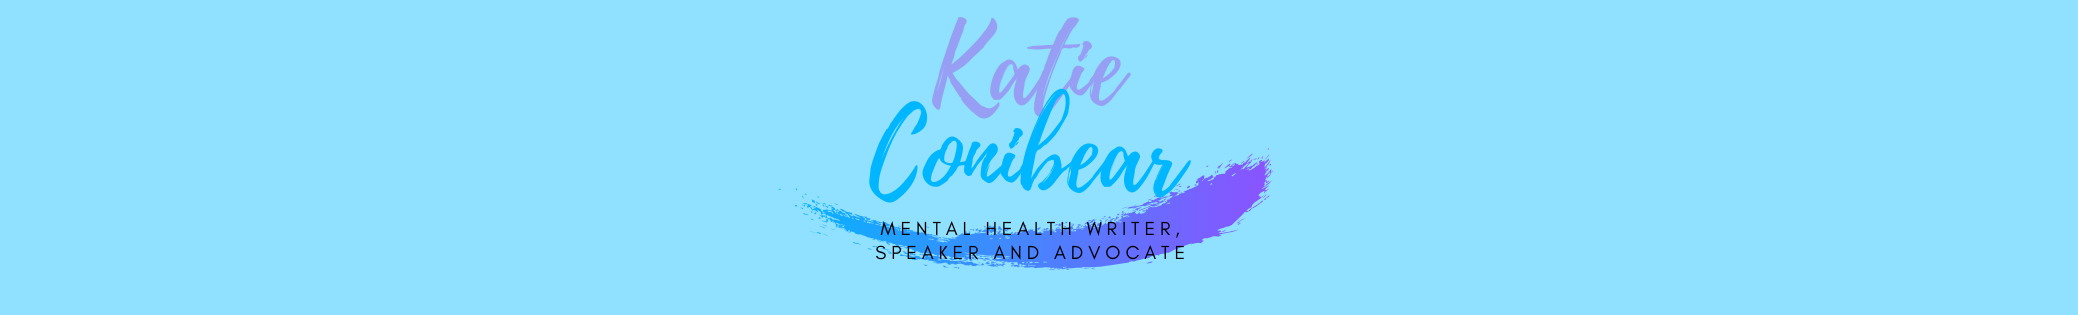 Katie Conibear. Mental health writer, speaker and advocate.